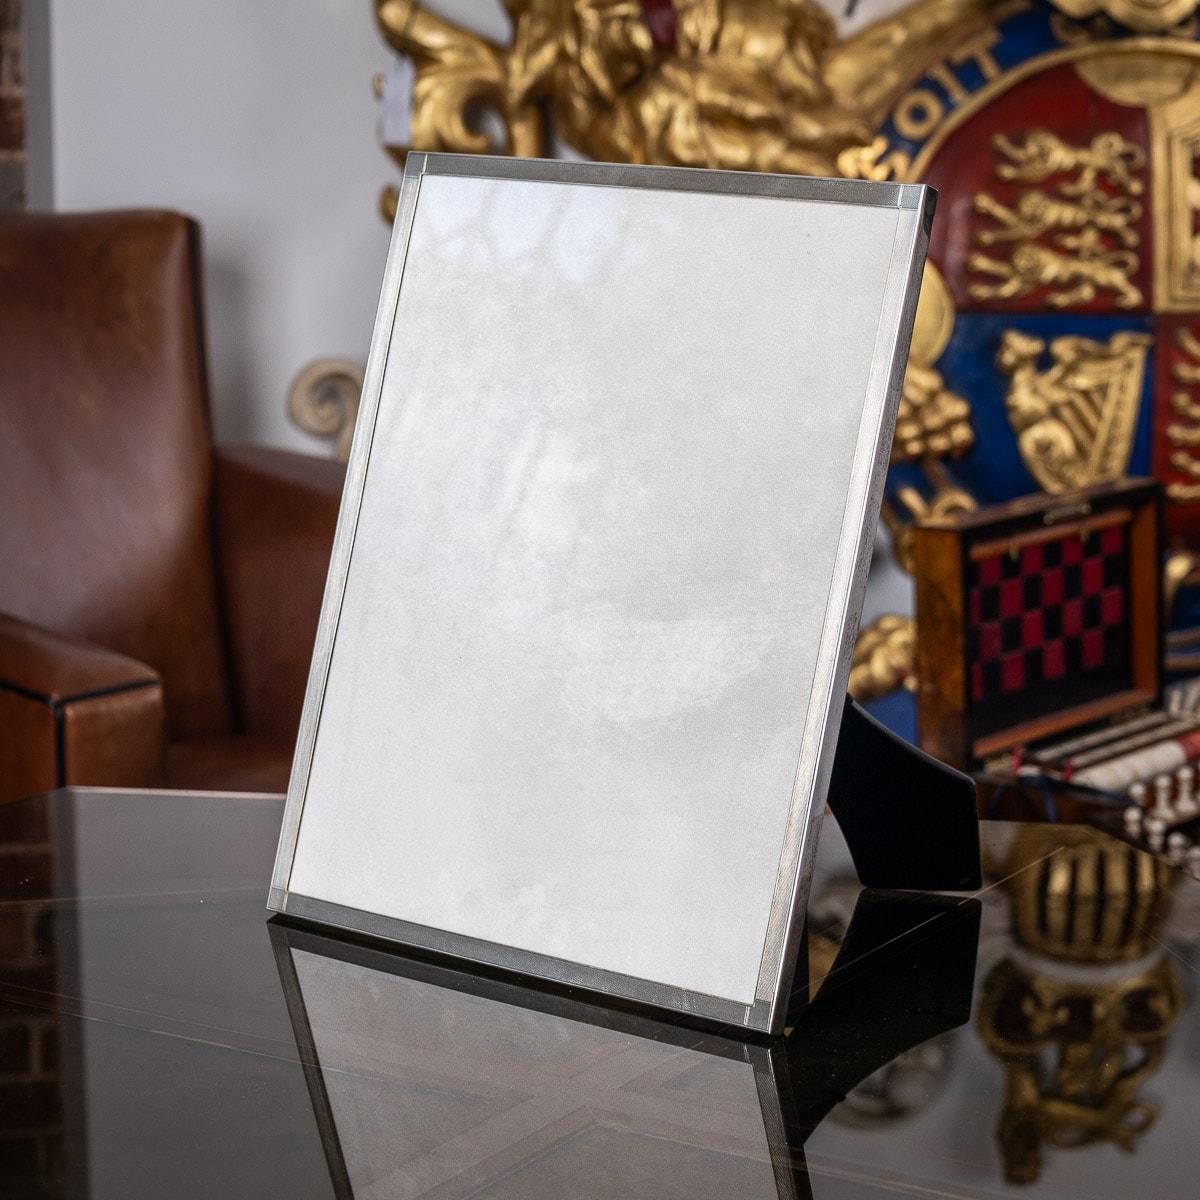 20th Century Art Deco silver & engine turned photograph frame, with stylised corners, mounted on an ebonised easel support and set with glass.
Hallmarked English silver, Birmingham, year 1950 (A), Maker S&M (Sanders & Mackenzie).

Condition
In